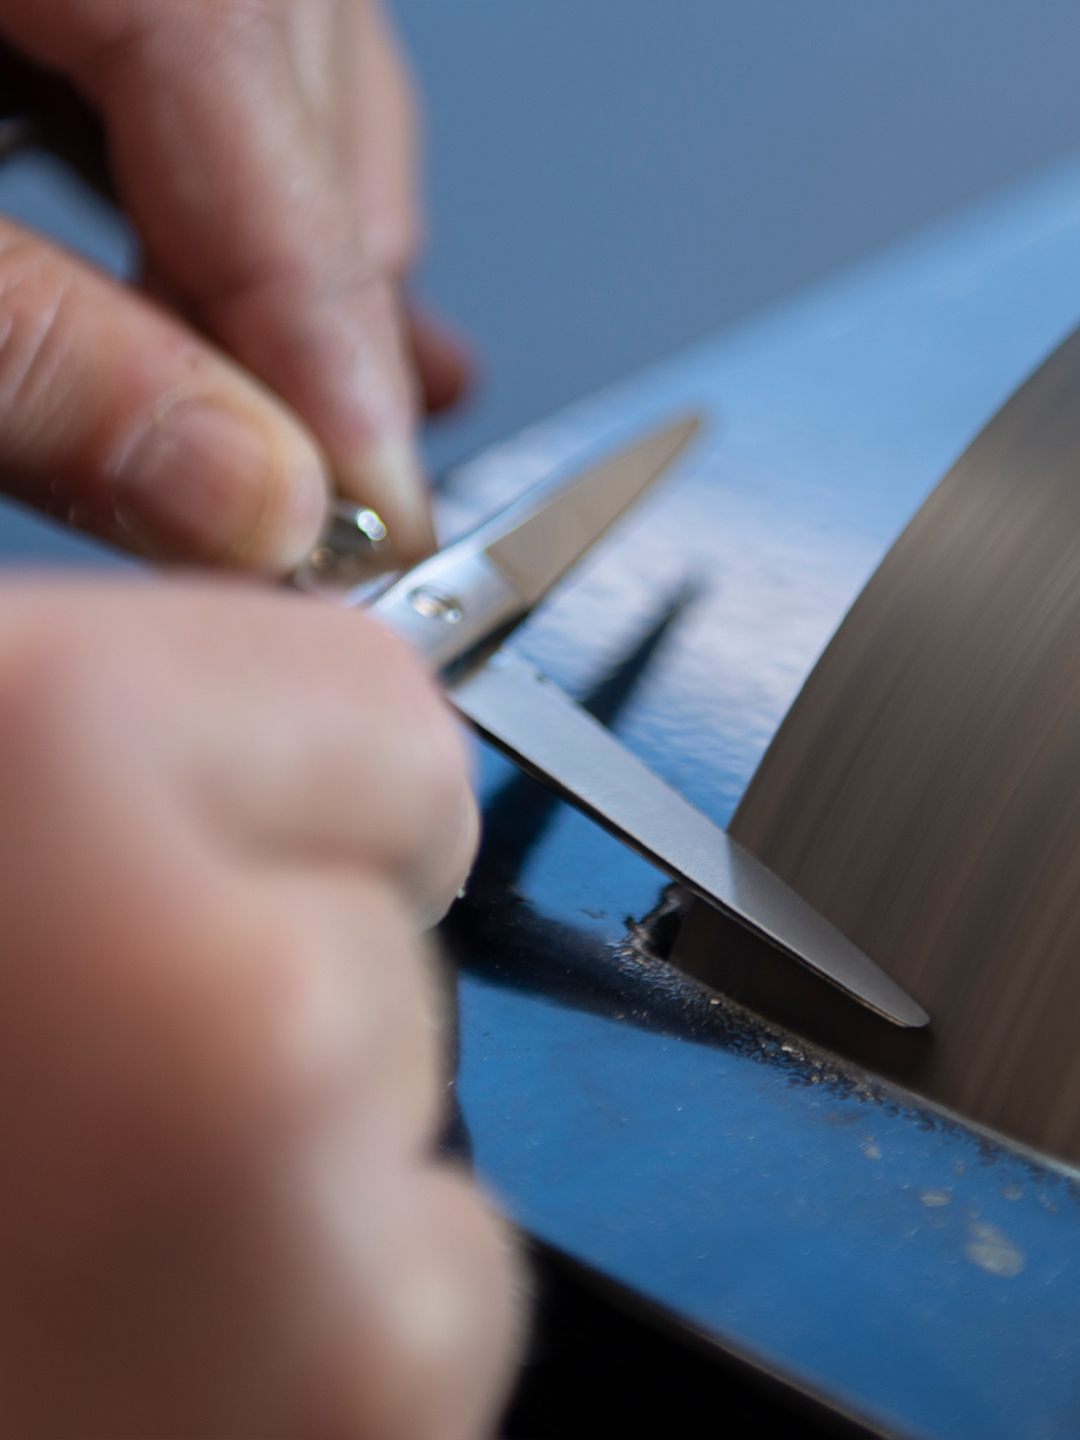 Surgical scissors being sharpened.